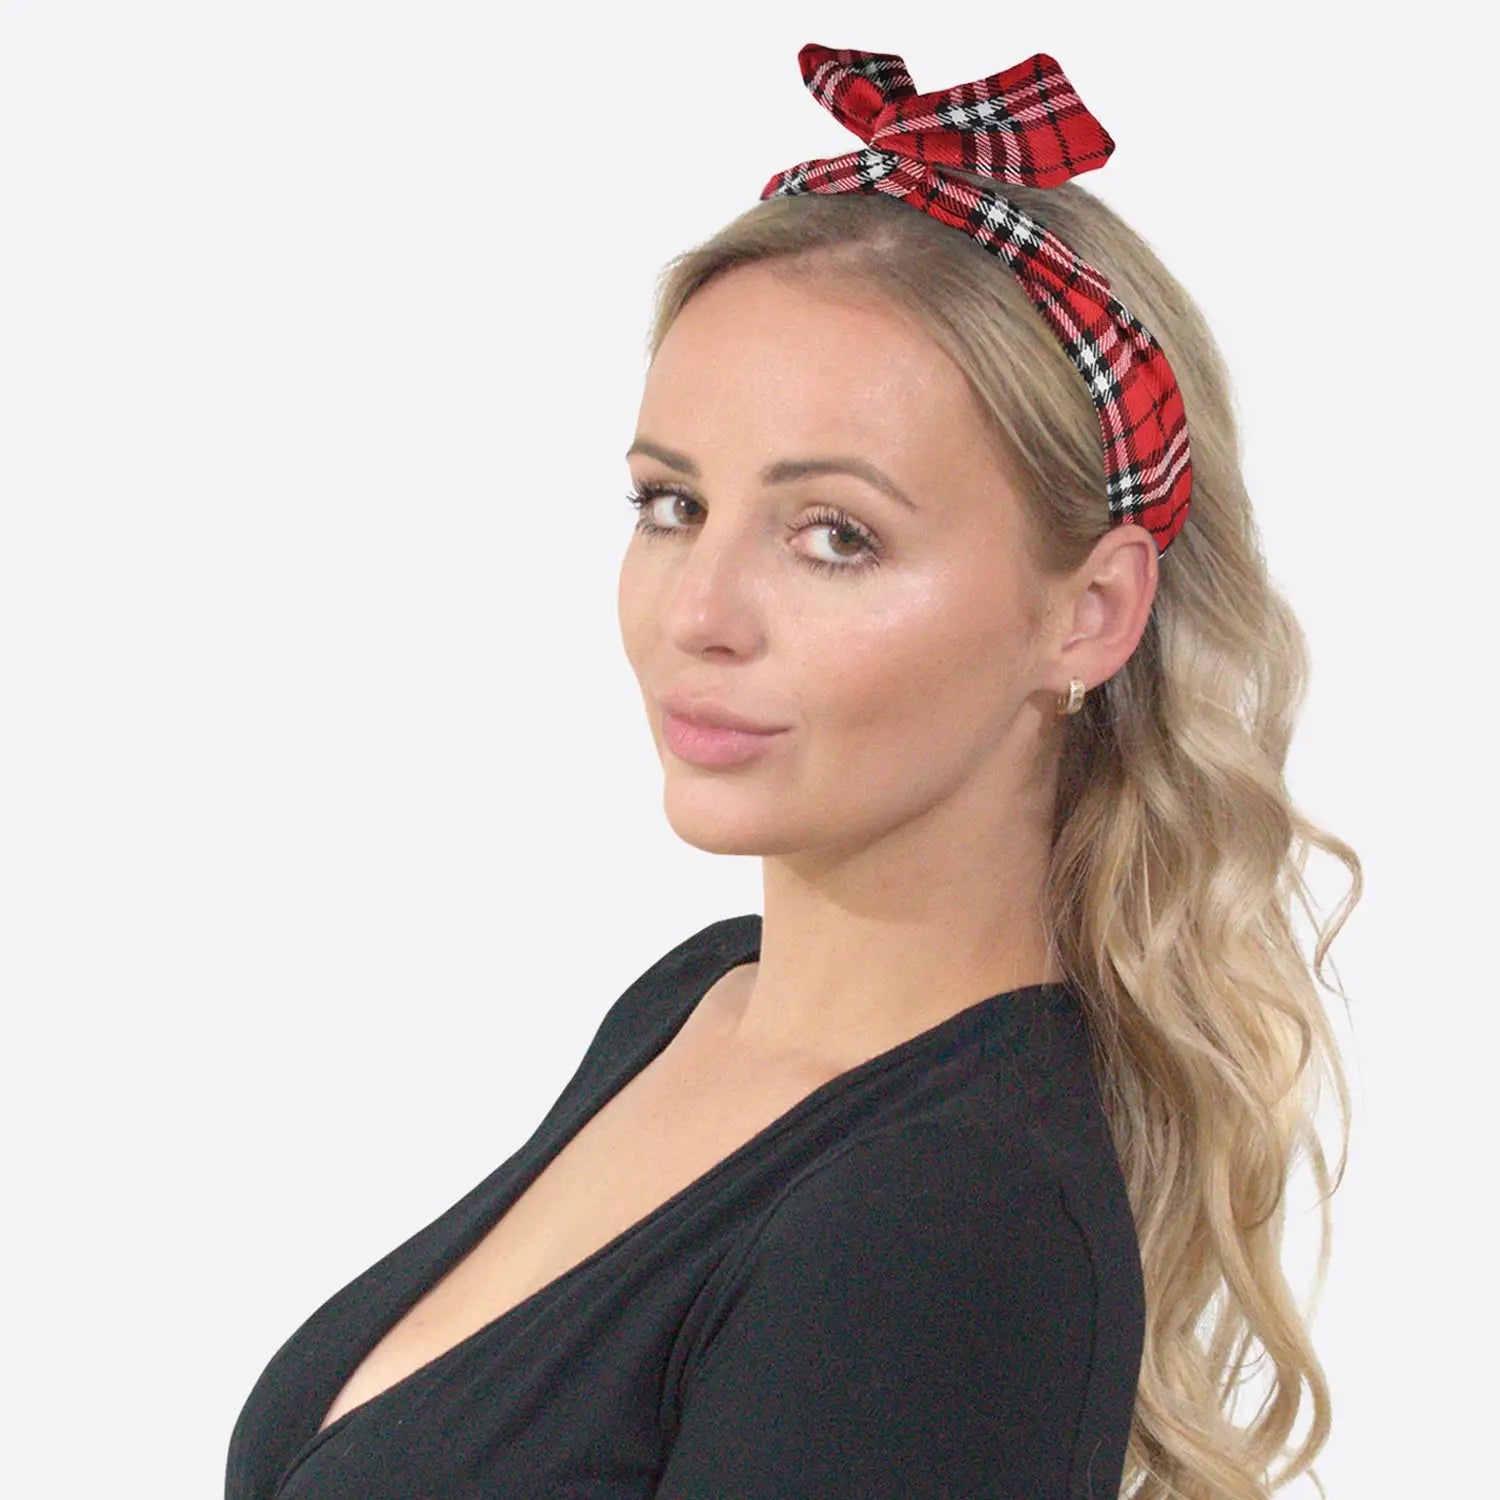 Woman with red and black plaid wire headband from Retro Tartan & Plain Wire Headband Set